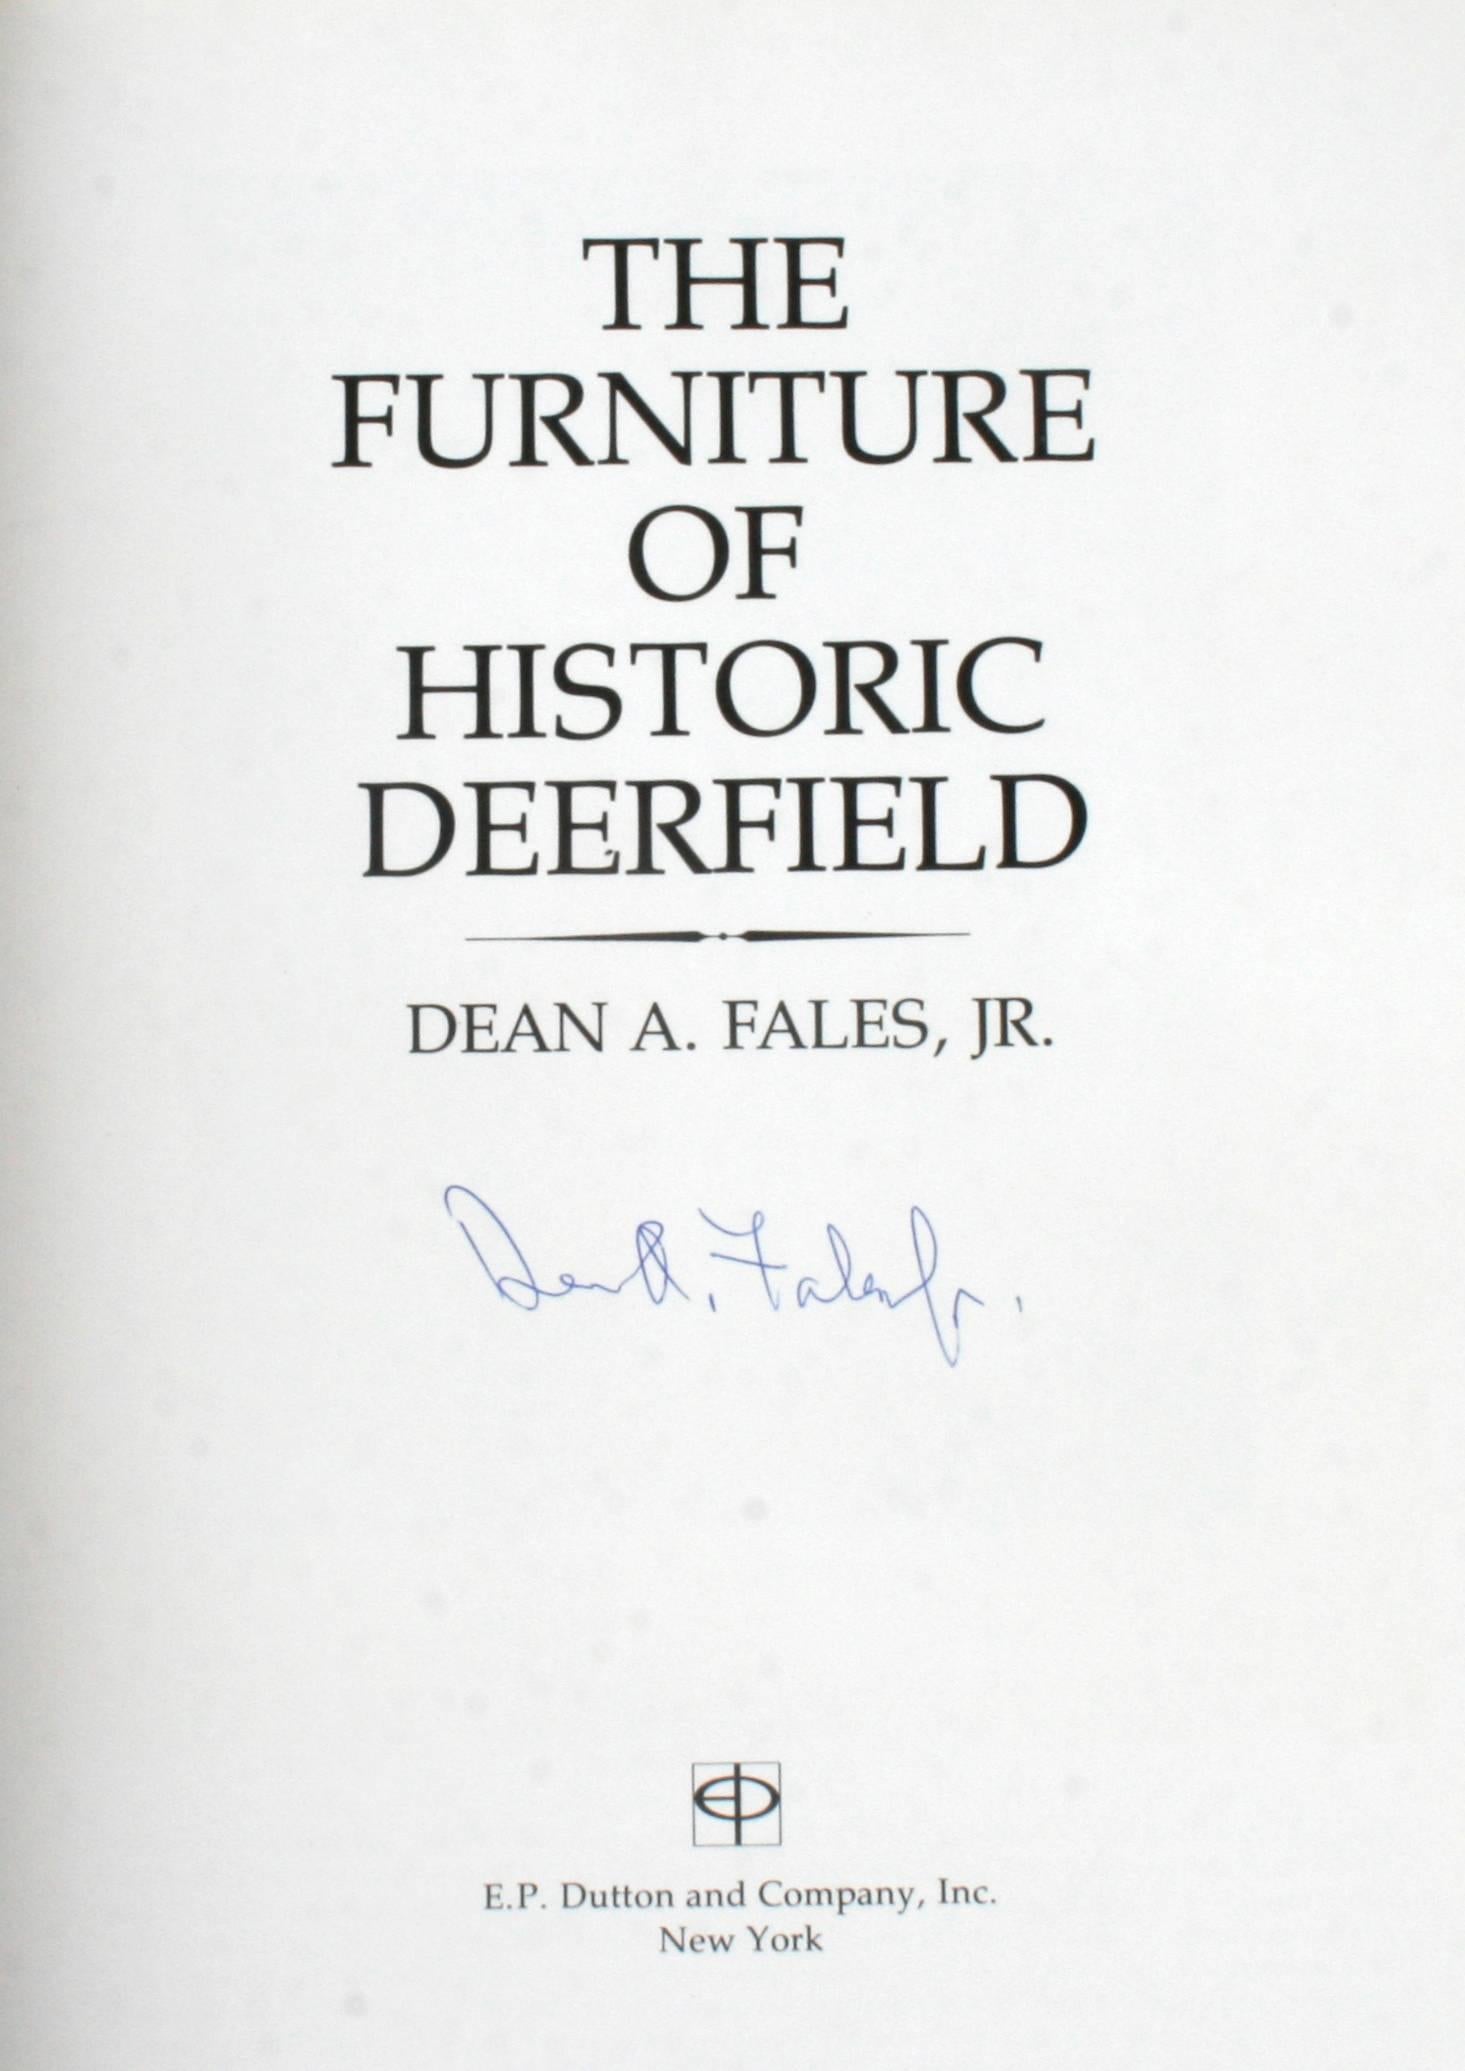 The Furniture of Historic Deerfield by Dean A. Fales, Jr. New York: E.P. Dutton and Company, Inc., 1976. Signed first edition hardcover with dust jacket. 294 pp. A beautiful book on the antique furniture of Historic Deerfield Mass. Along with basic